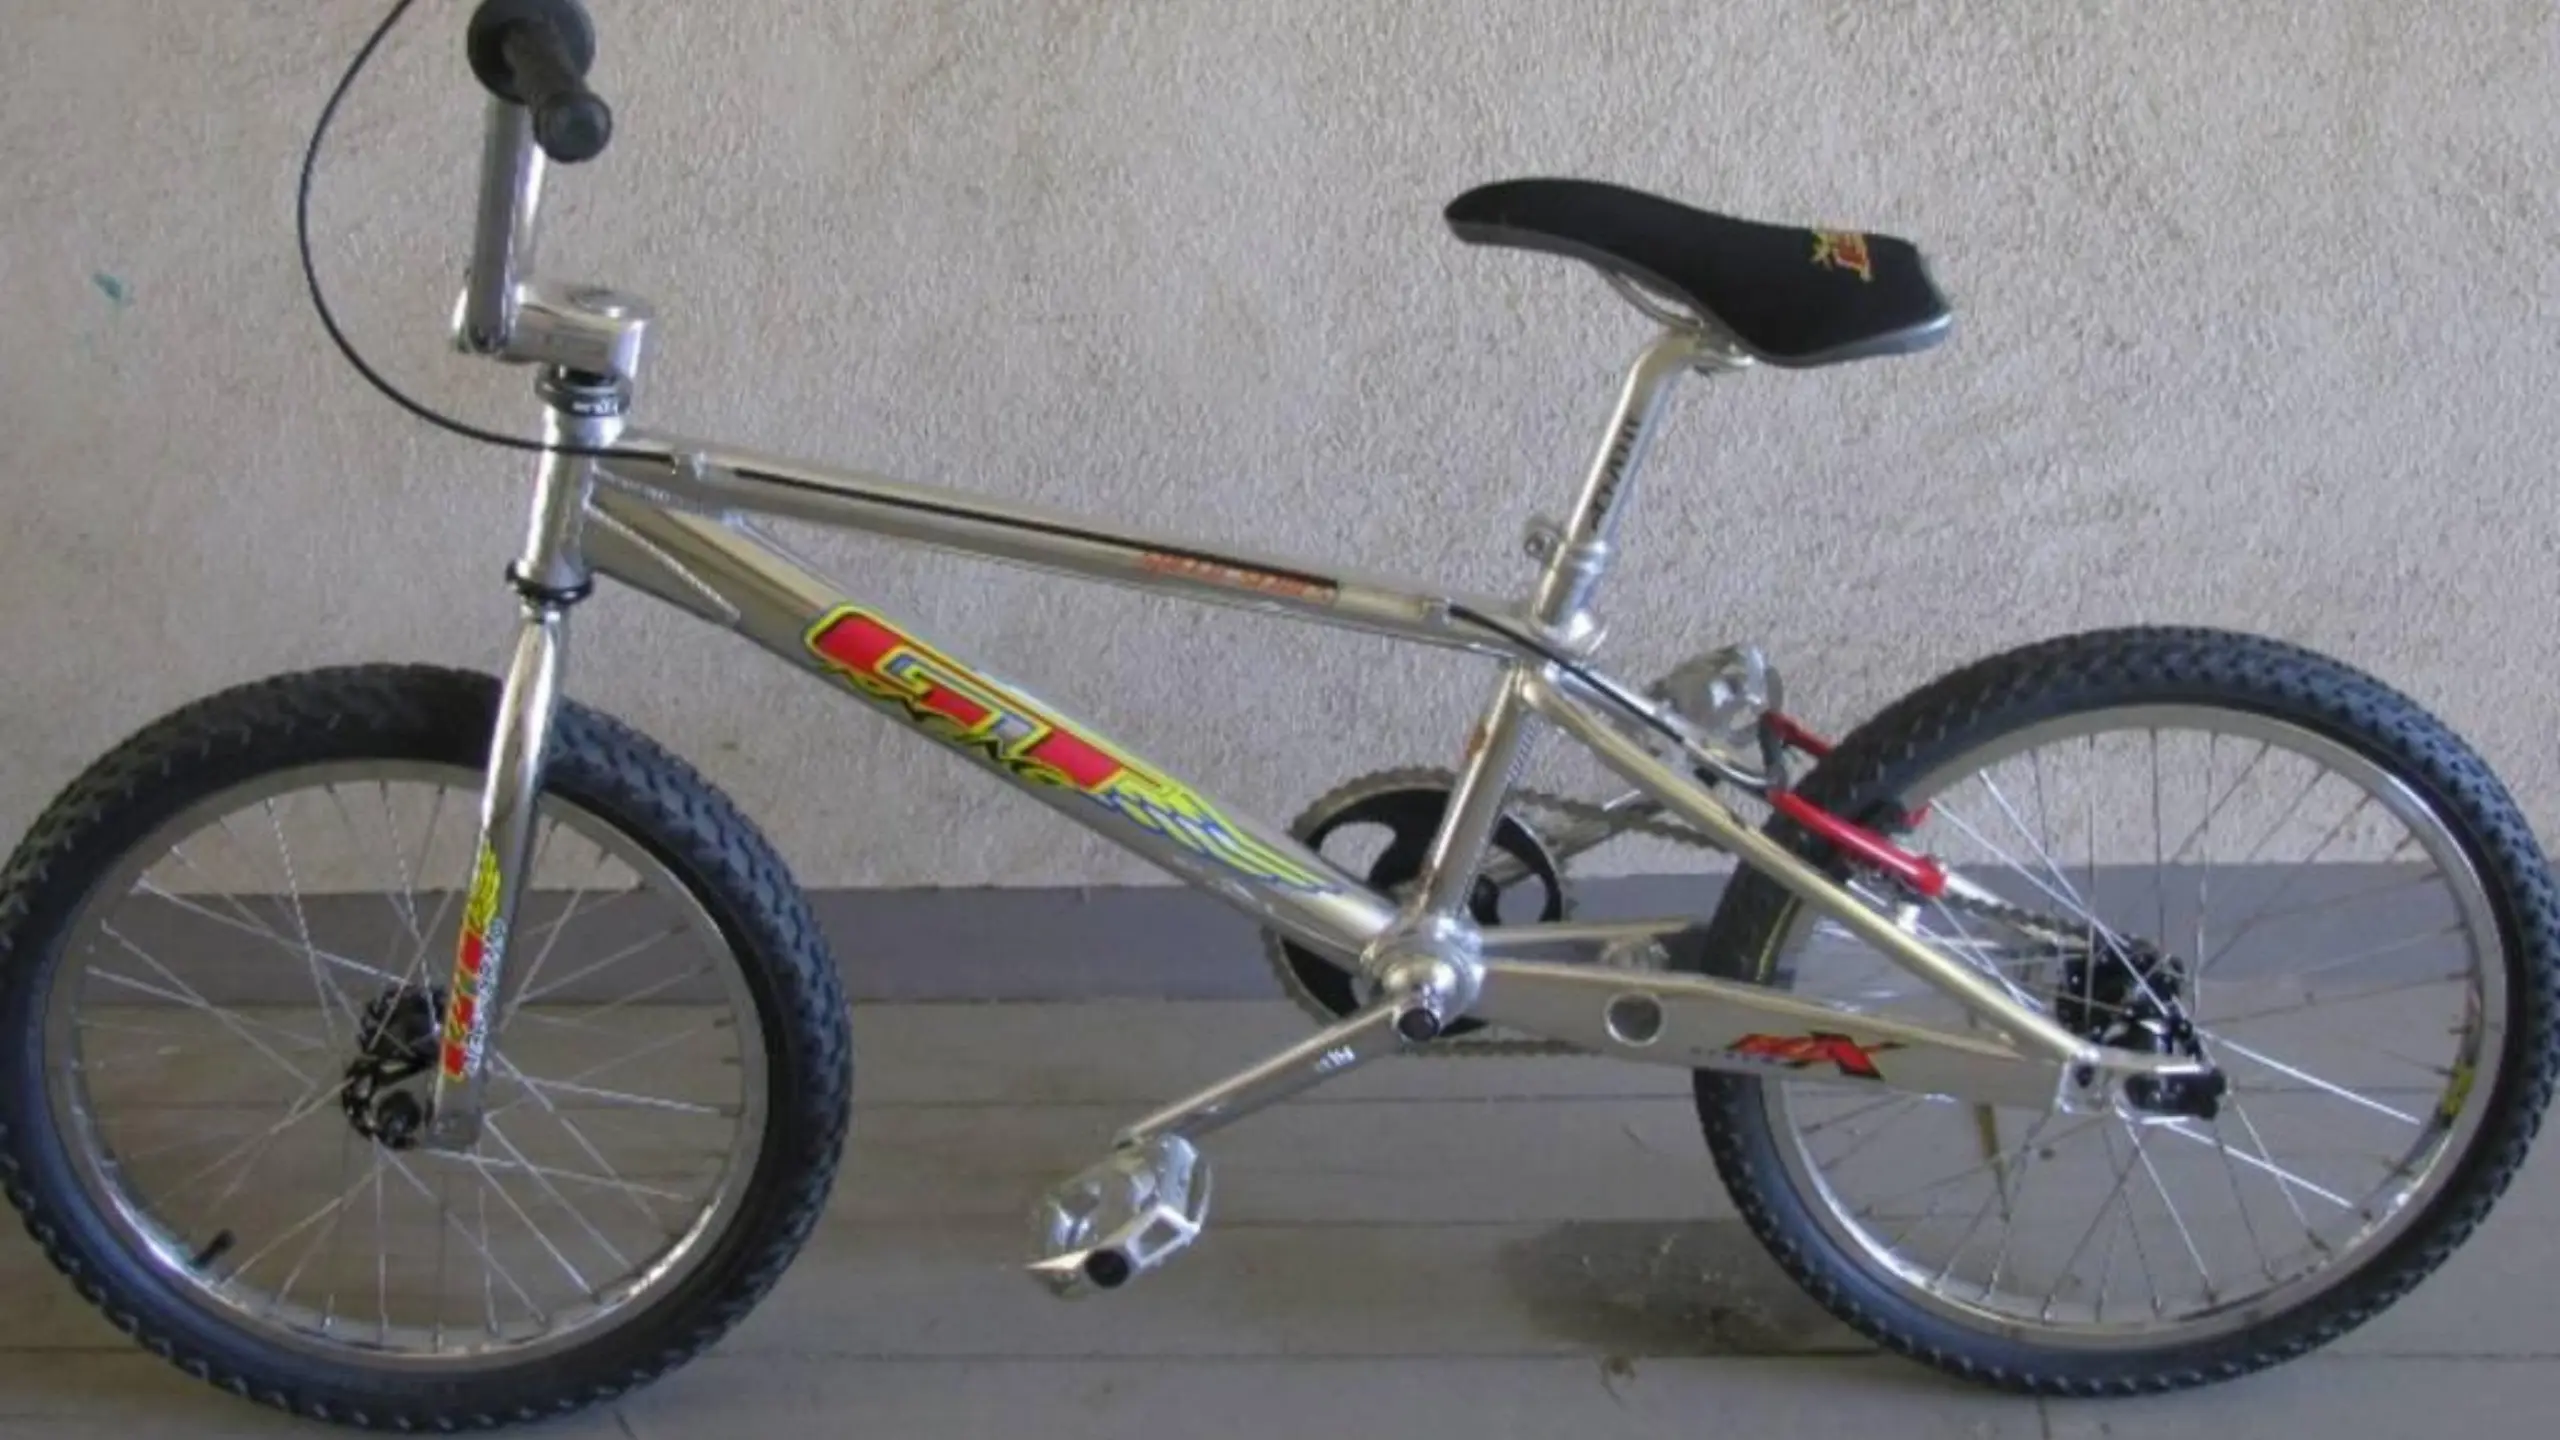 What Are The Downsides of GT BMX Bikes? - GT BMX Bikes Cons